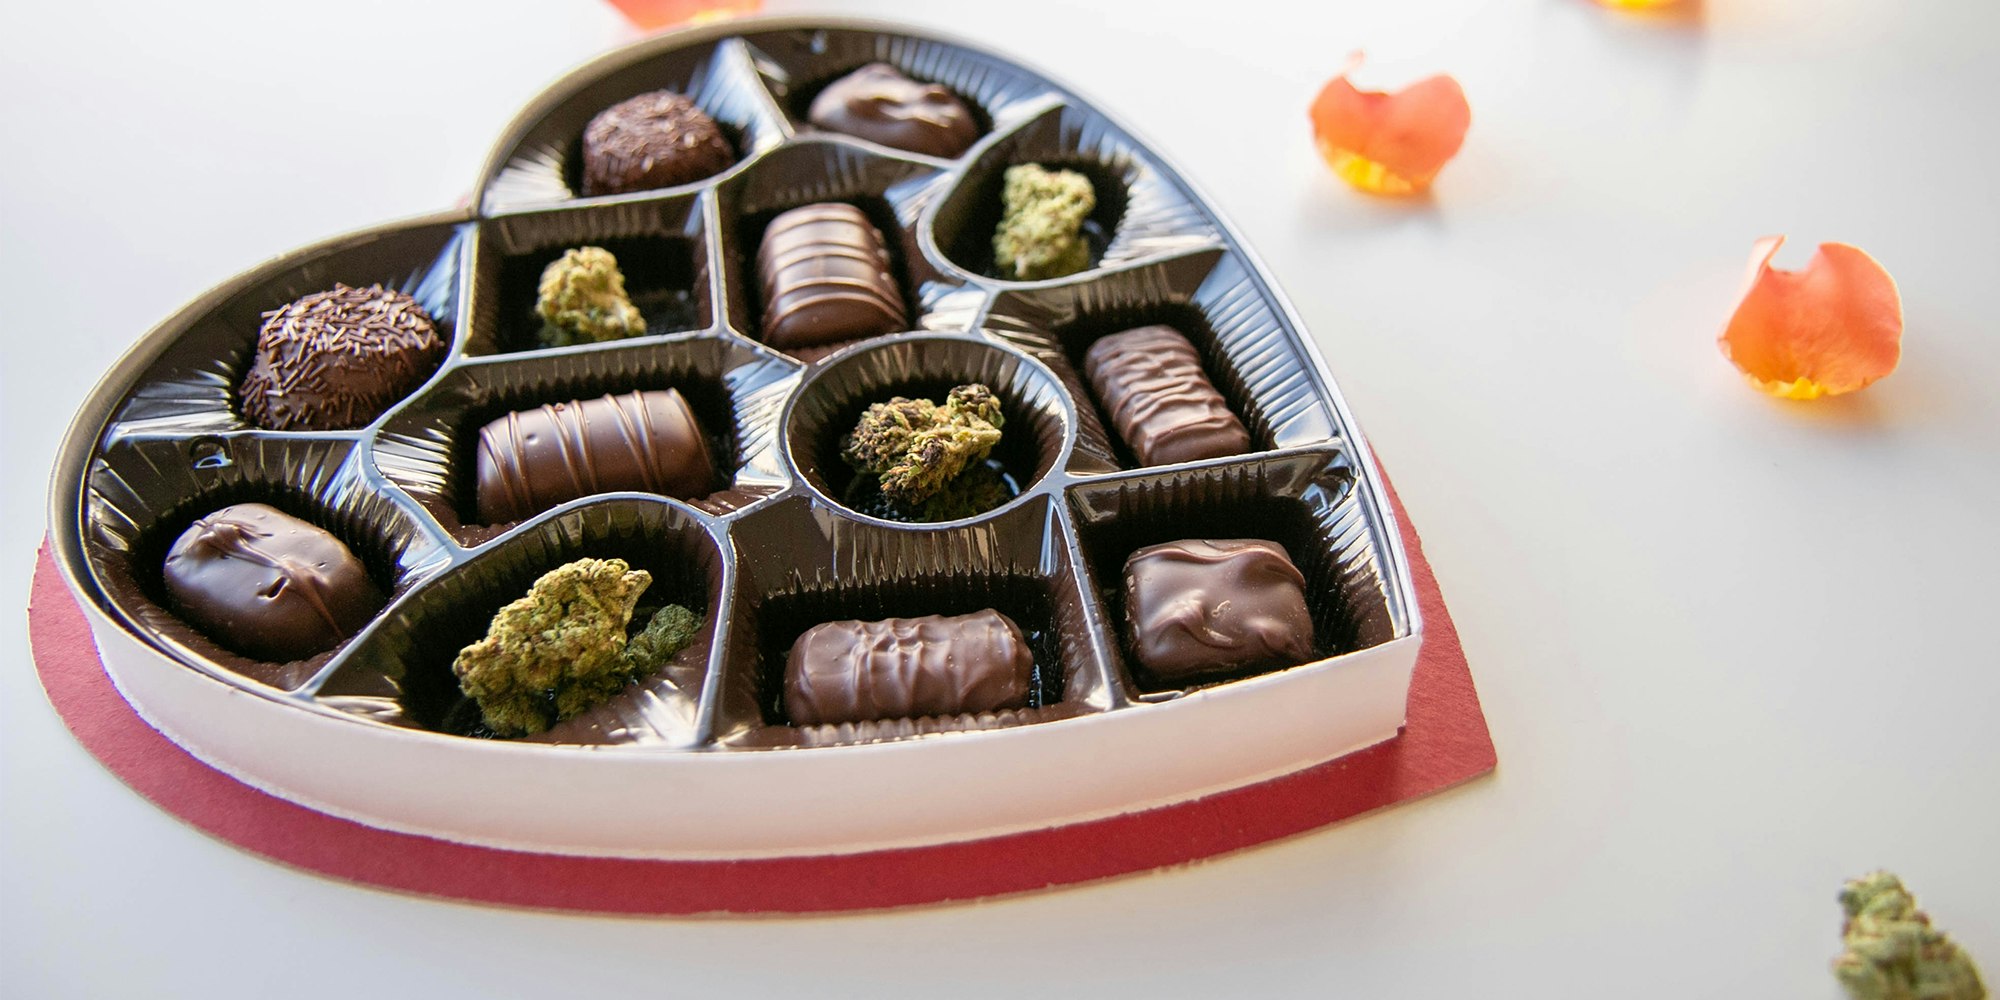 Valentine's Day gift box of chocolates and weed nugs with rose petals scattered around it.